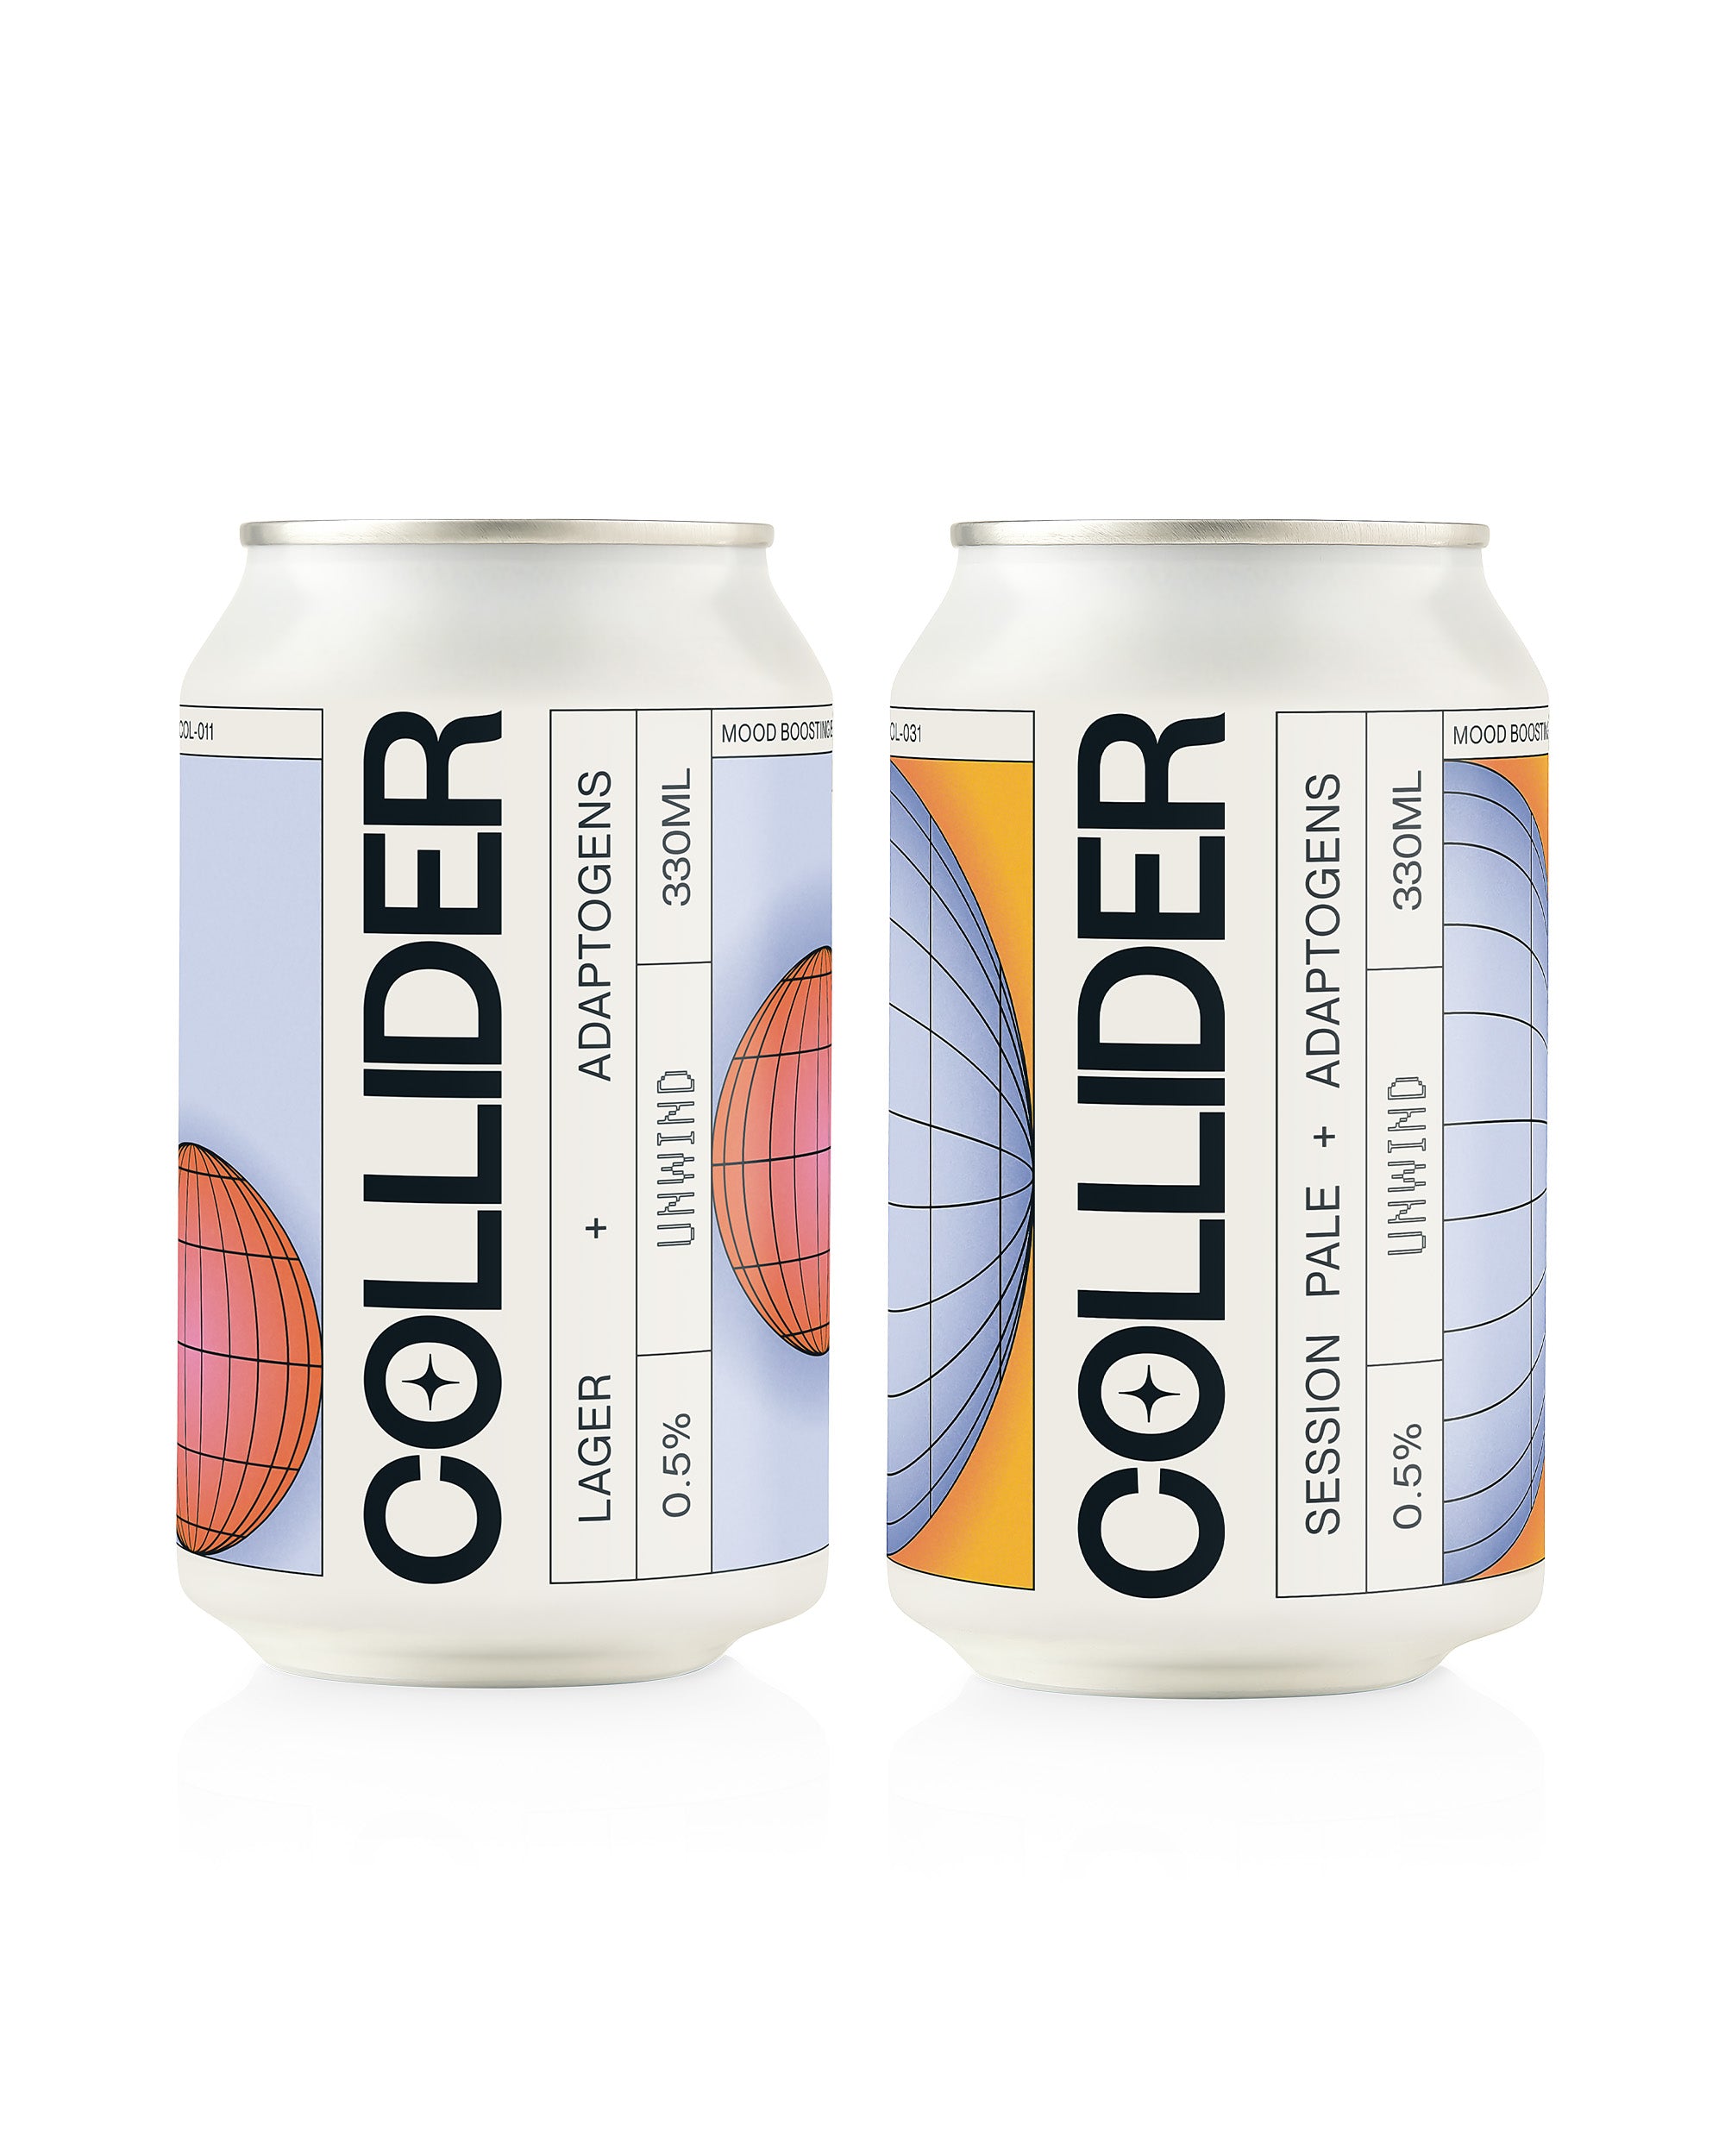 Mood boosting alcohol free lager and pale in cans infused with adaptogens and fungi.